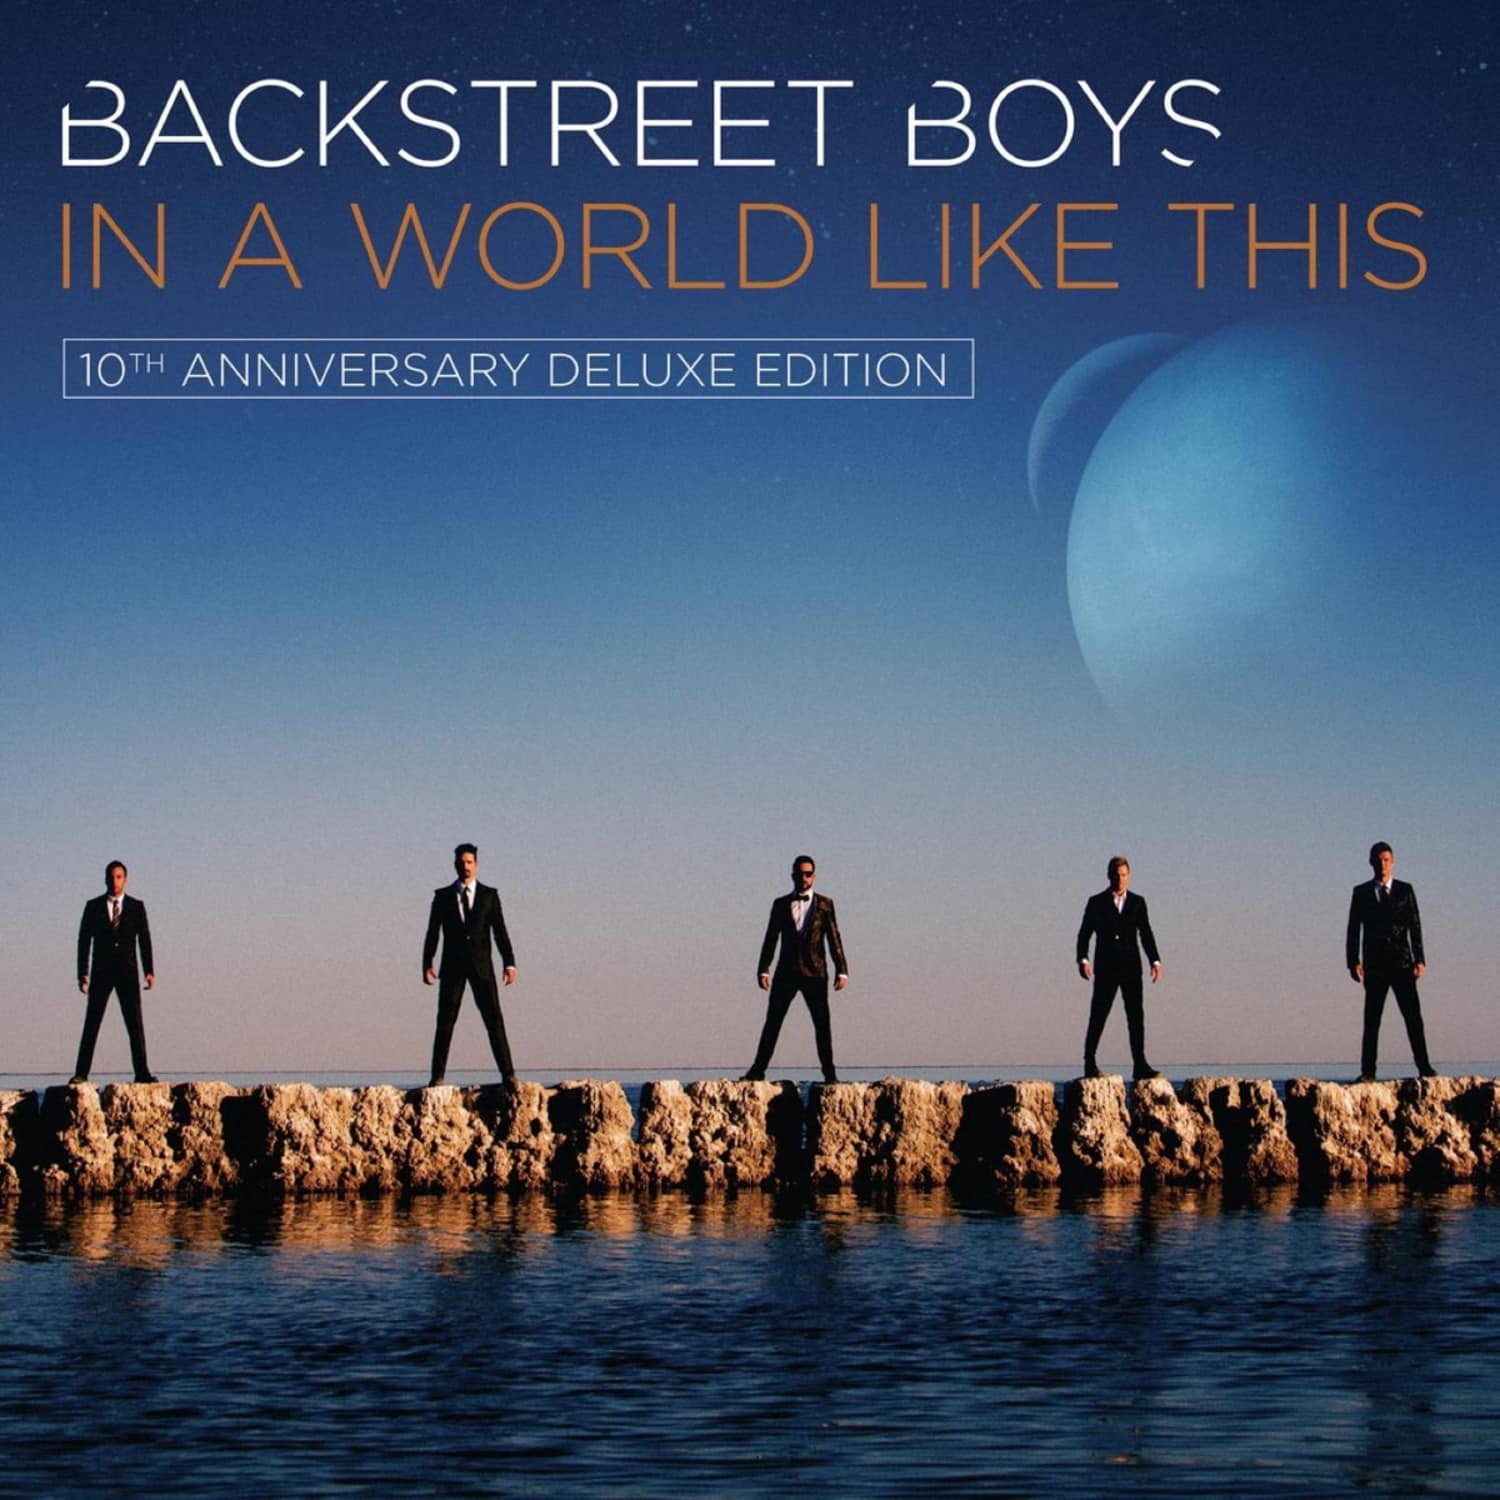 Backstreet Boys - IN A WORLD LIKE THIS